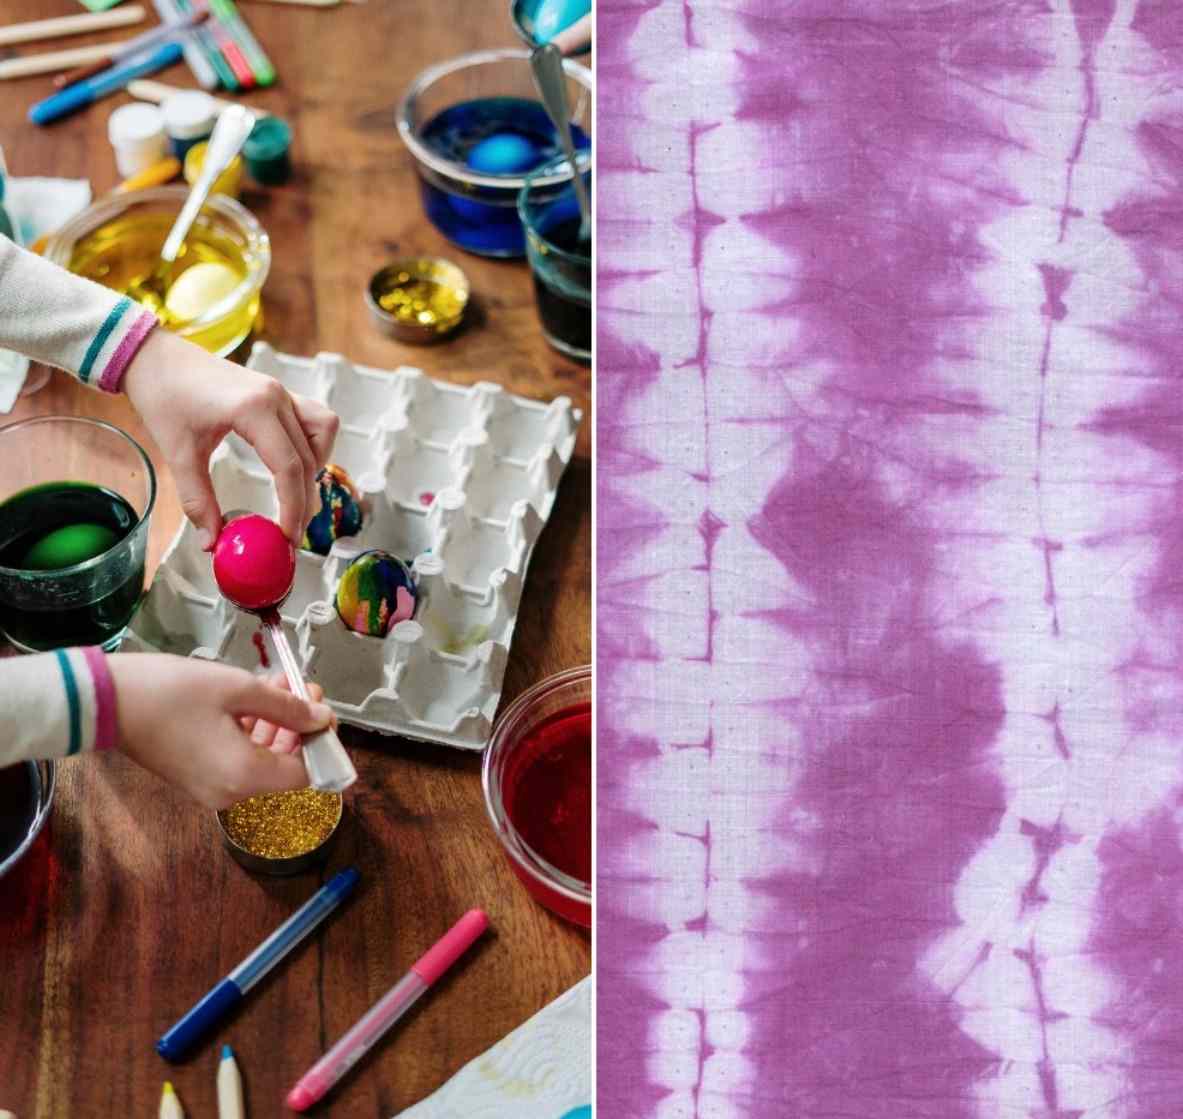 Skills required for starting a Tie-Dye business.